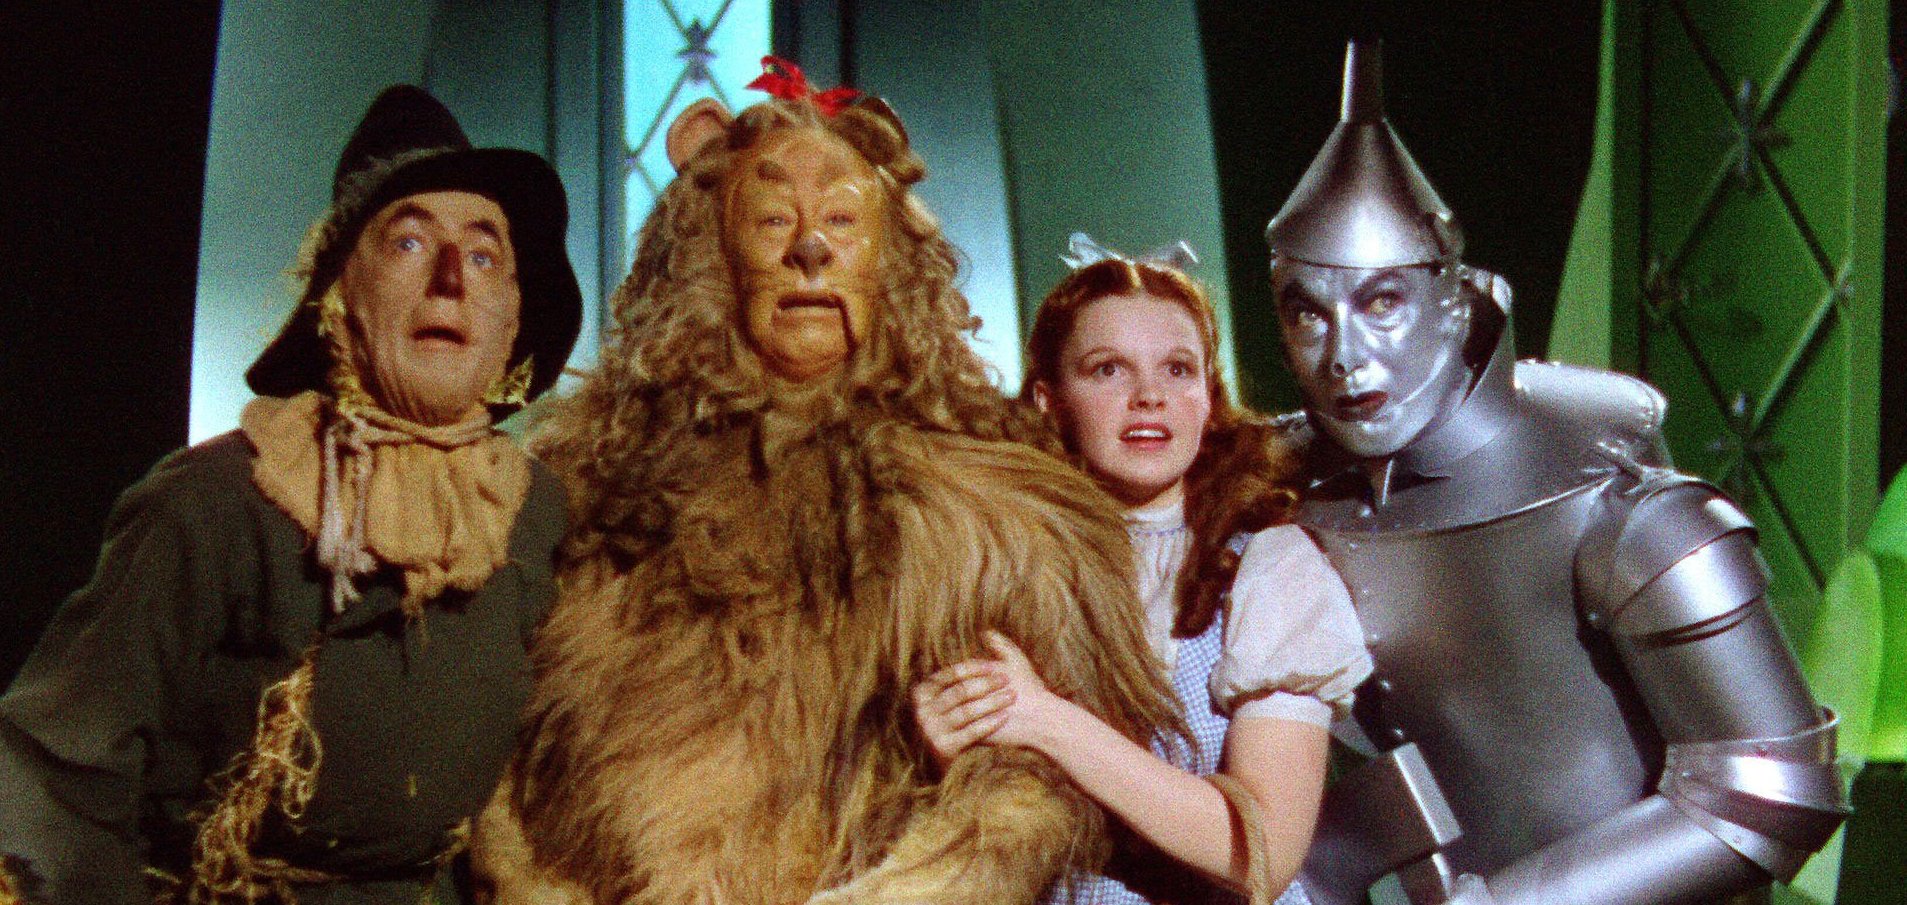 Wizard Of Oz Featured